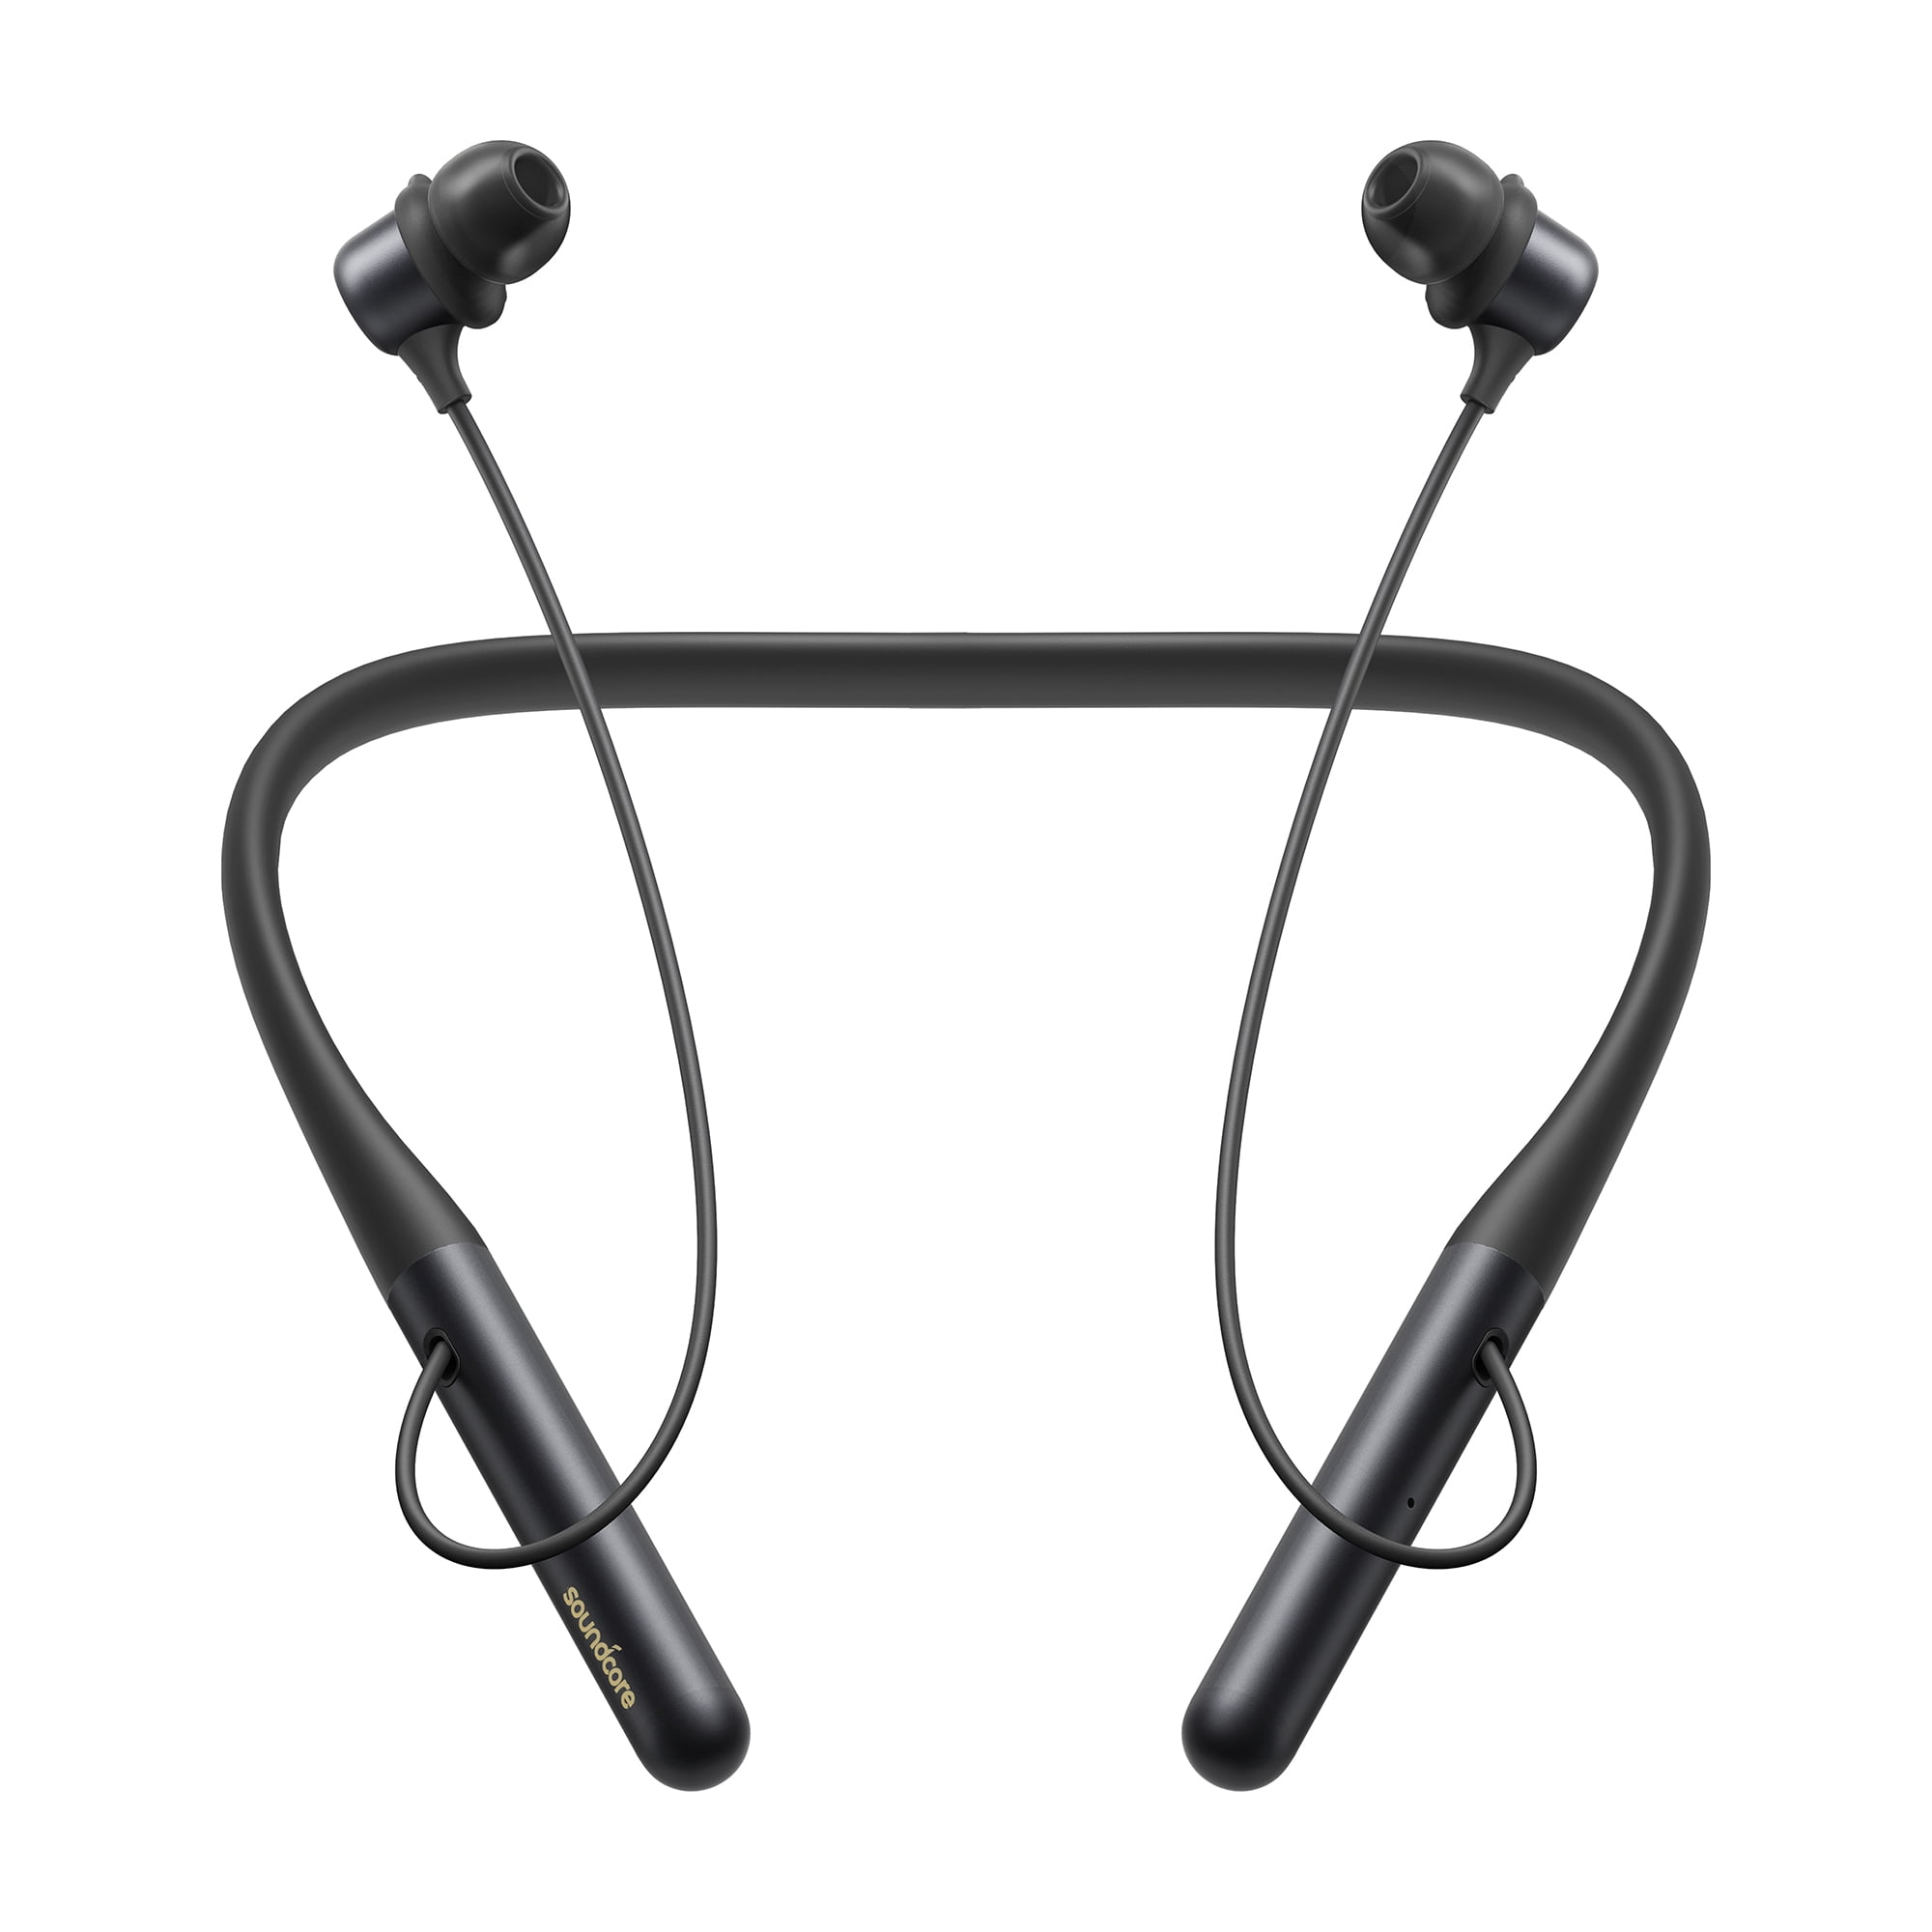 10 mm Drivers Anker Soundcore Life U2 Bluetooth Neckband Headphones with 24 H Playtime IPX7 Waterproof USB-C Fast Charging Crystal-Clear Calls with CVC 8.0 Foldable & Lightweight Build 